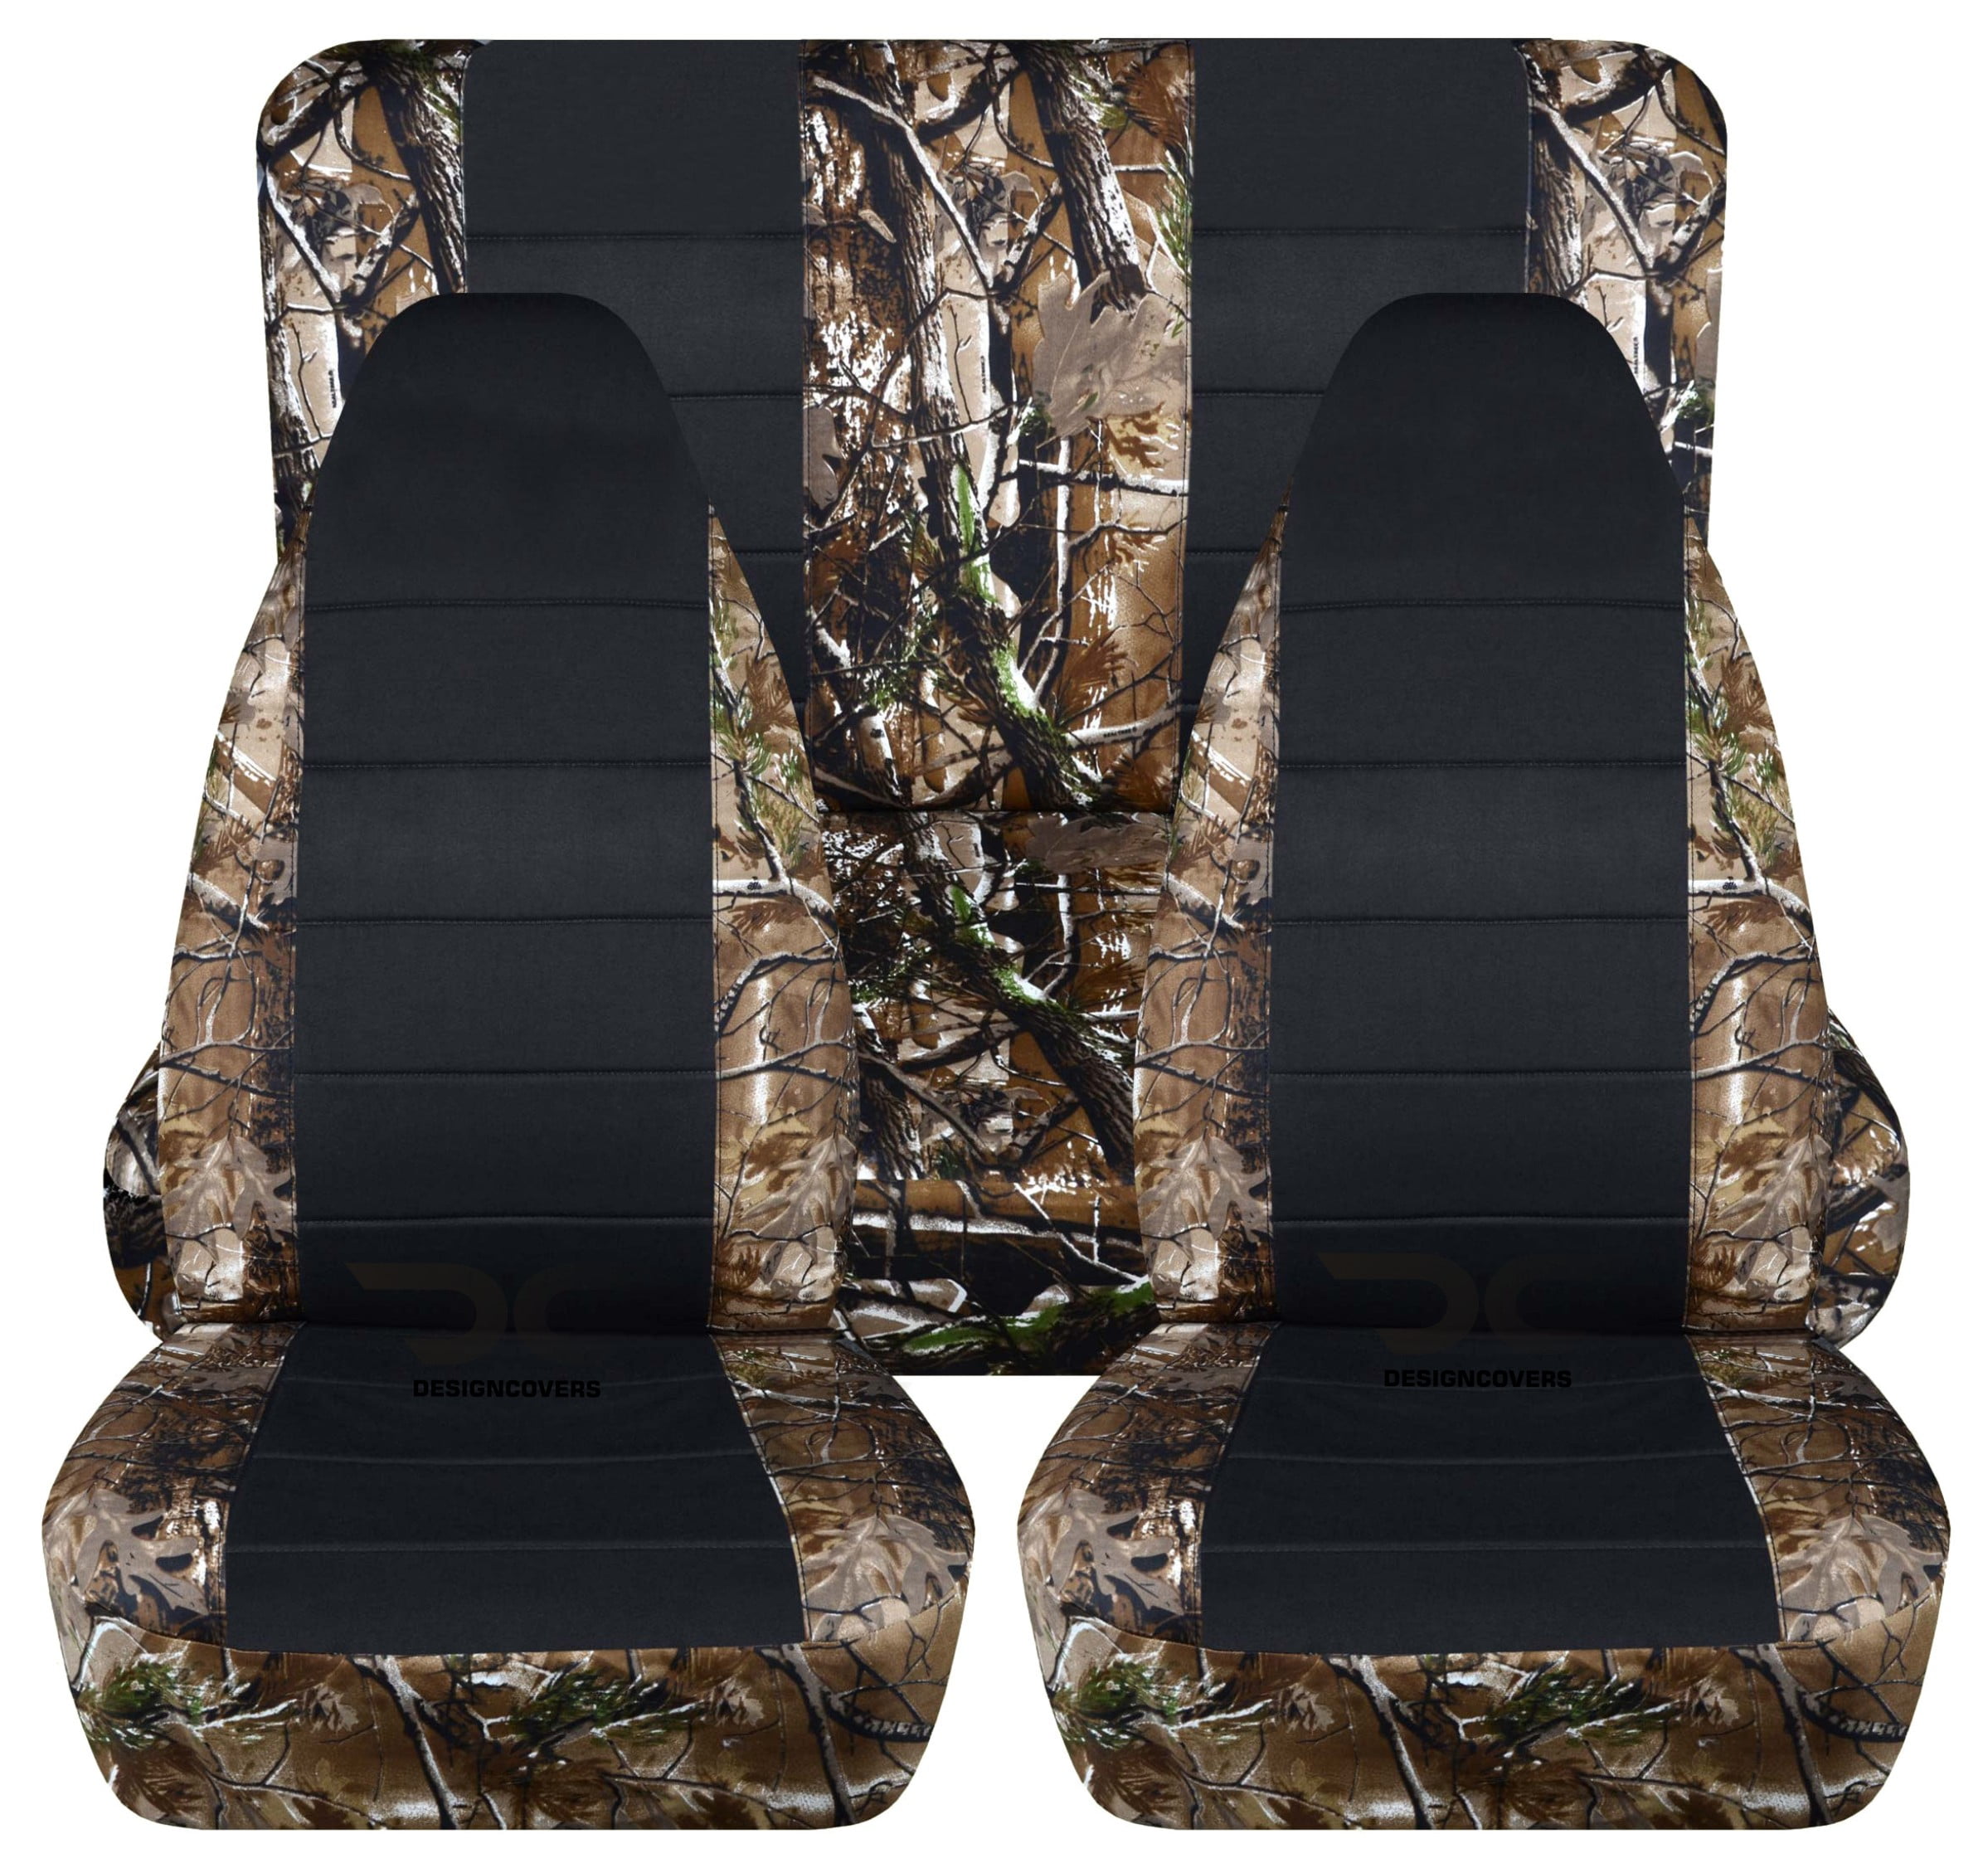 T214-Designcovers Compatible with 1997-2002 Jeep Wrangler TJ Camo 2door Seat  Covers Woods Camouflage and Black - Full Set Front & Rear 